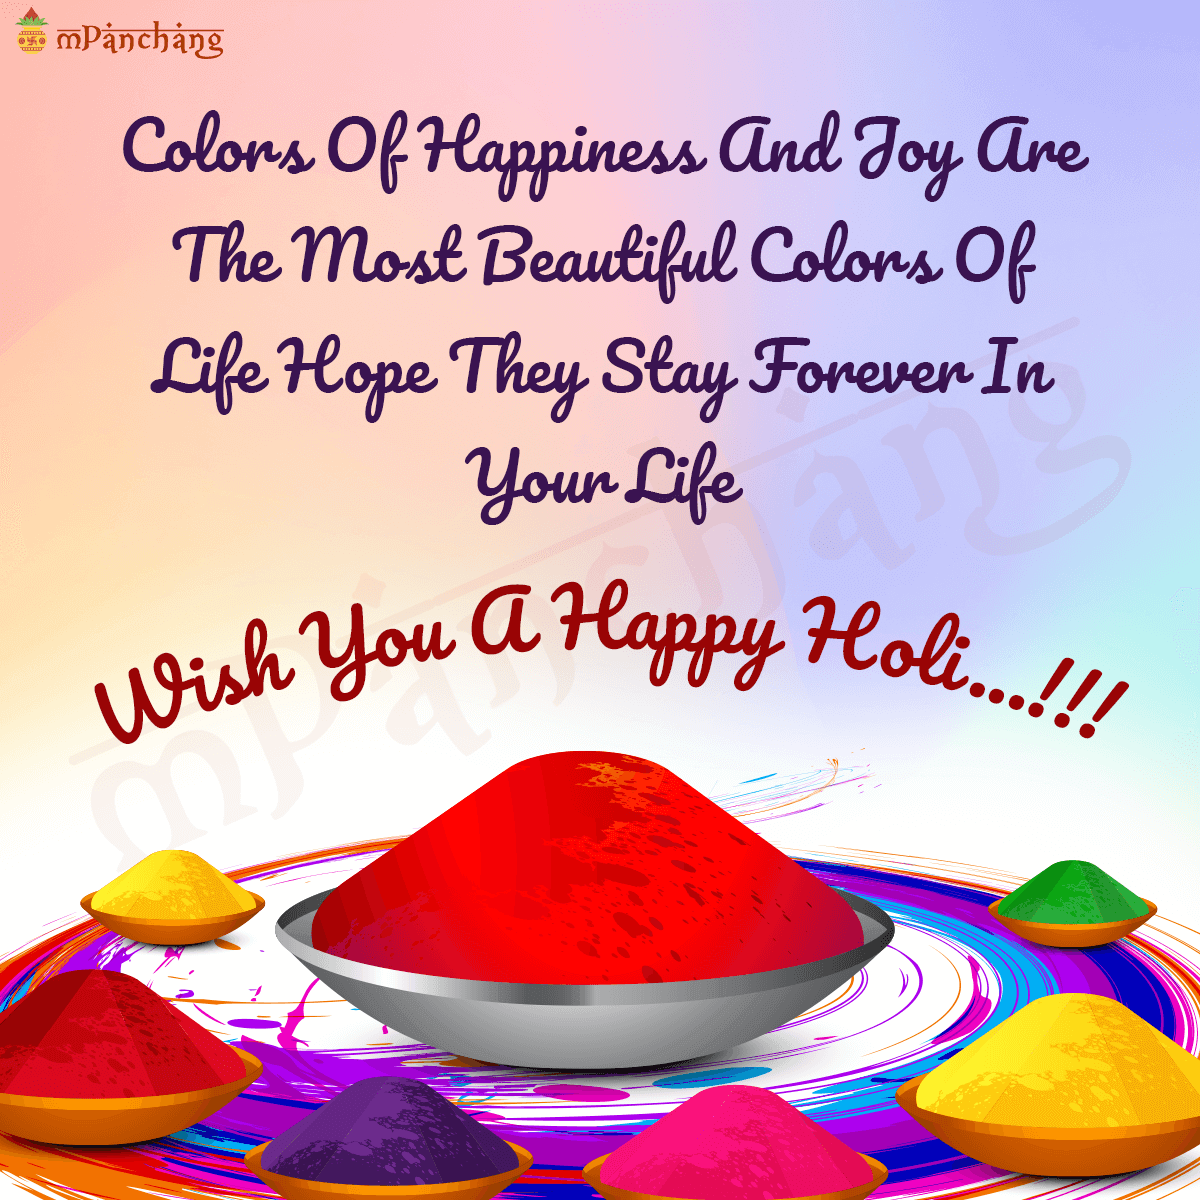 Happy Holi Wishes 2022 - Messages, Greetings, Images, Quotes & Shayari